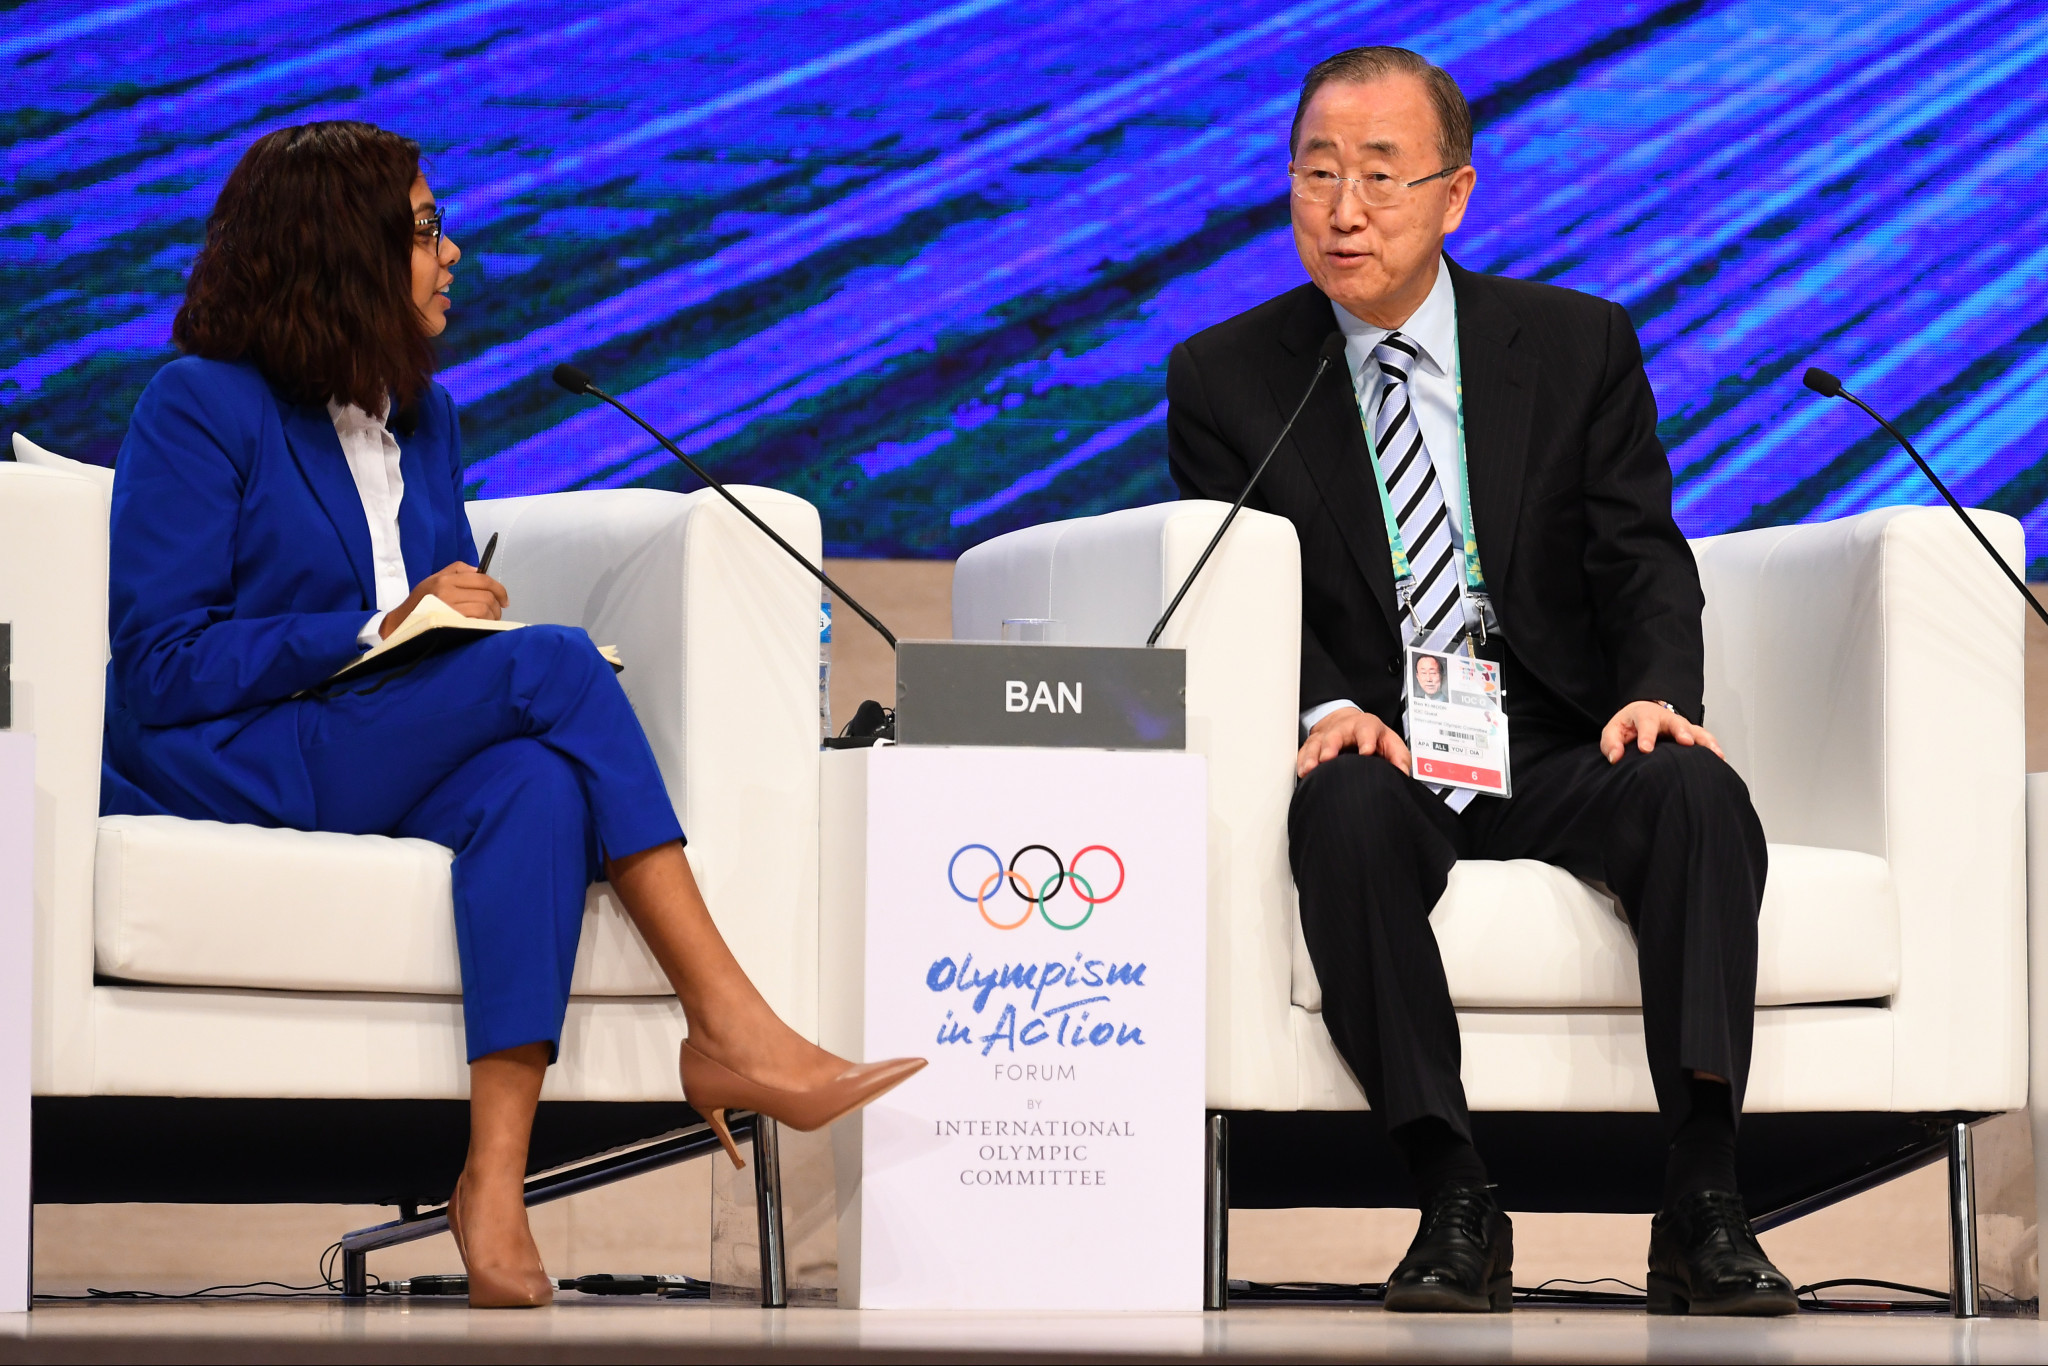 Thomas Bach claimed IOC Ethics Commission chair Ban Ki-Moon had proved his independence by recusing himself from the case involving Kuwait's Sheikh Ahmad Al-Fahad Al-Sabah ©Getty Images